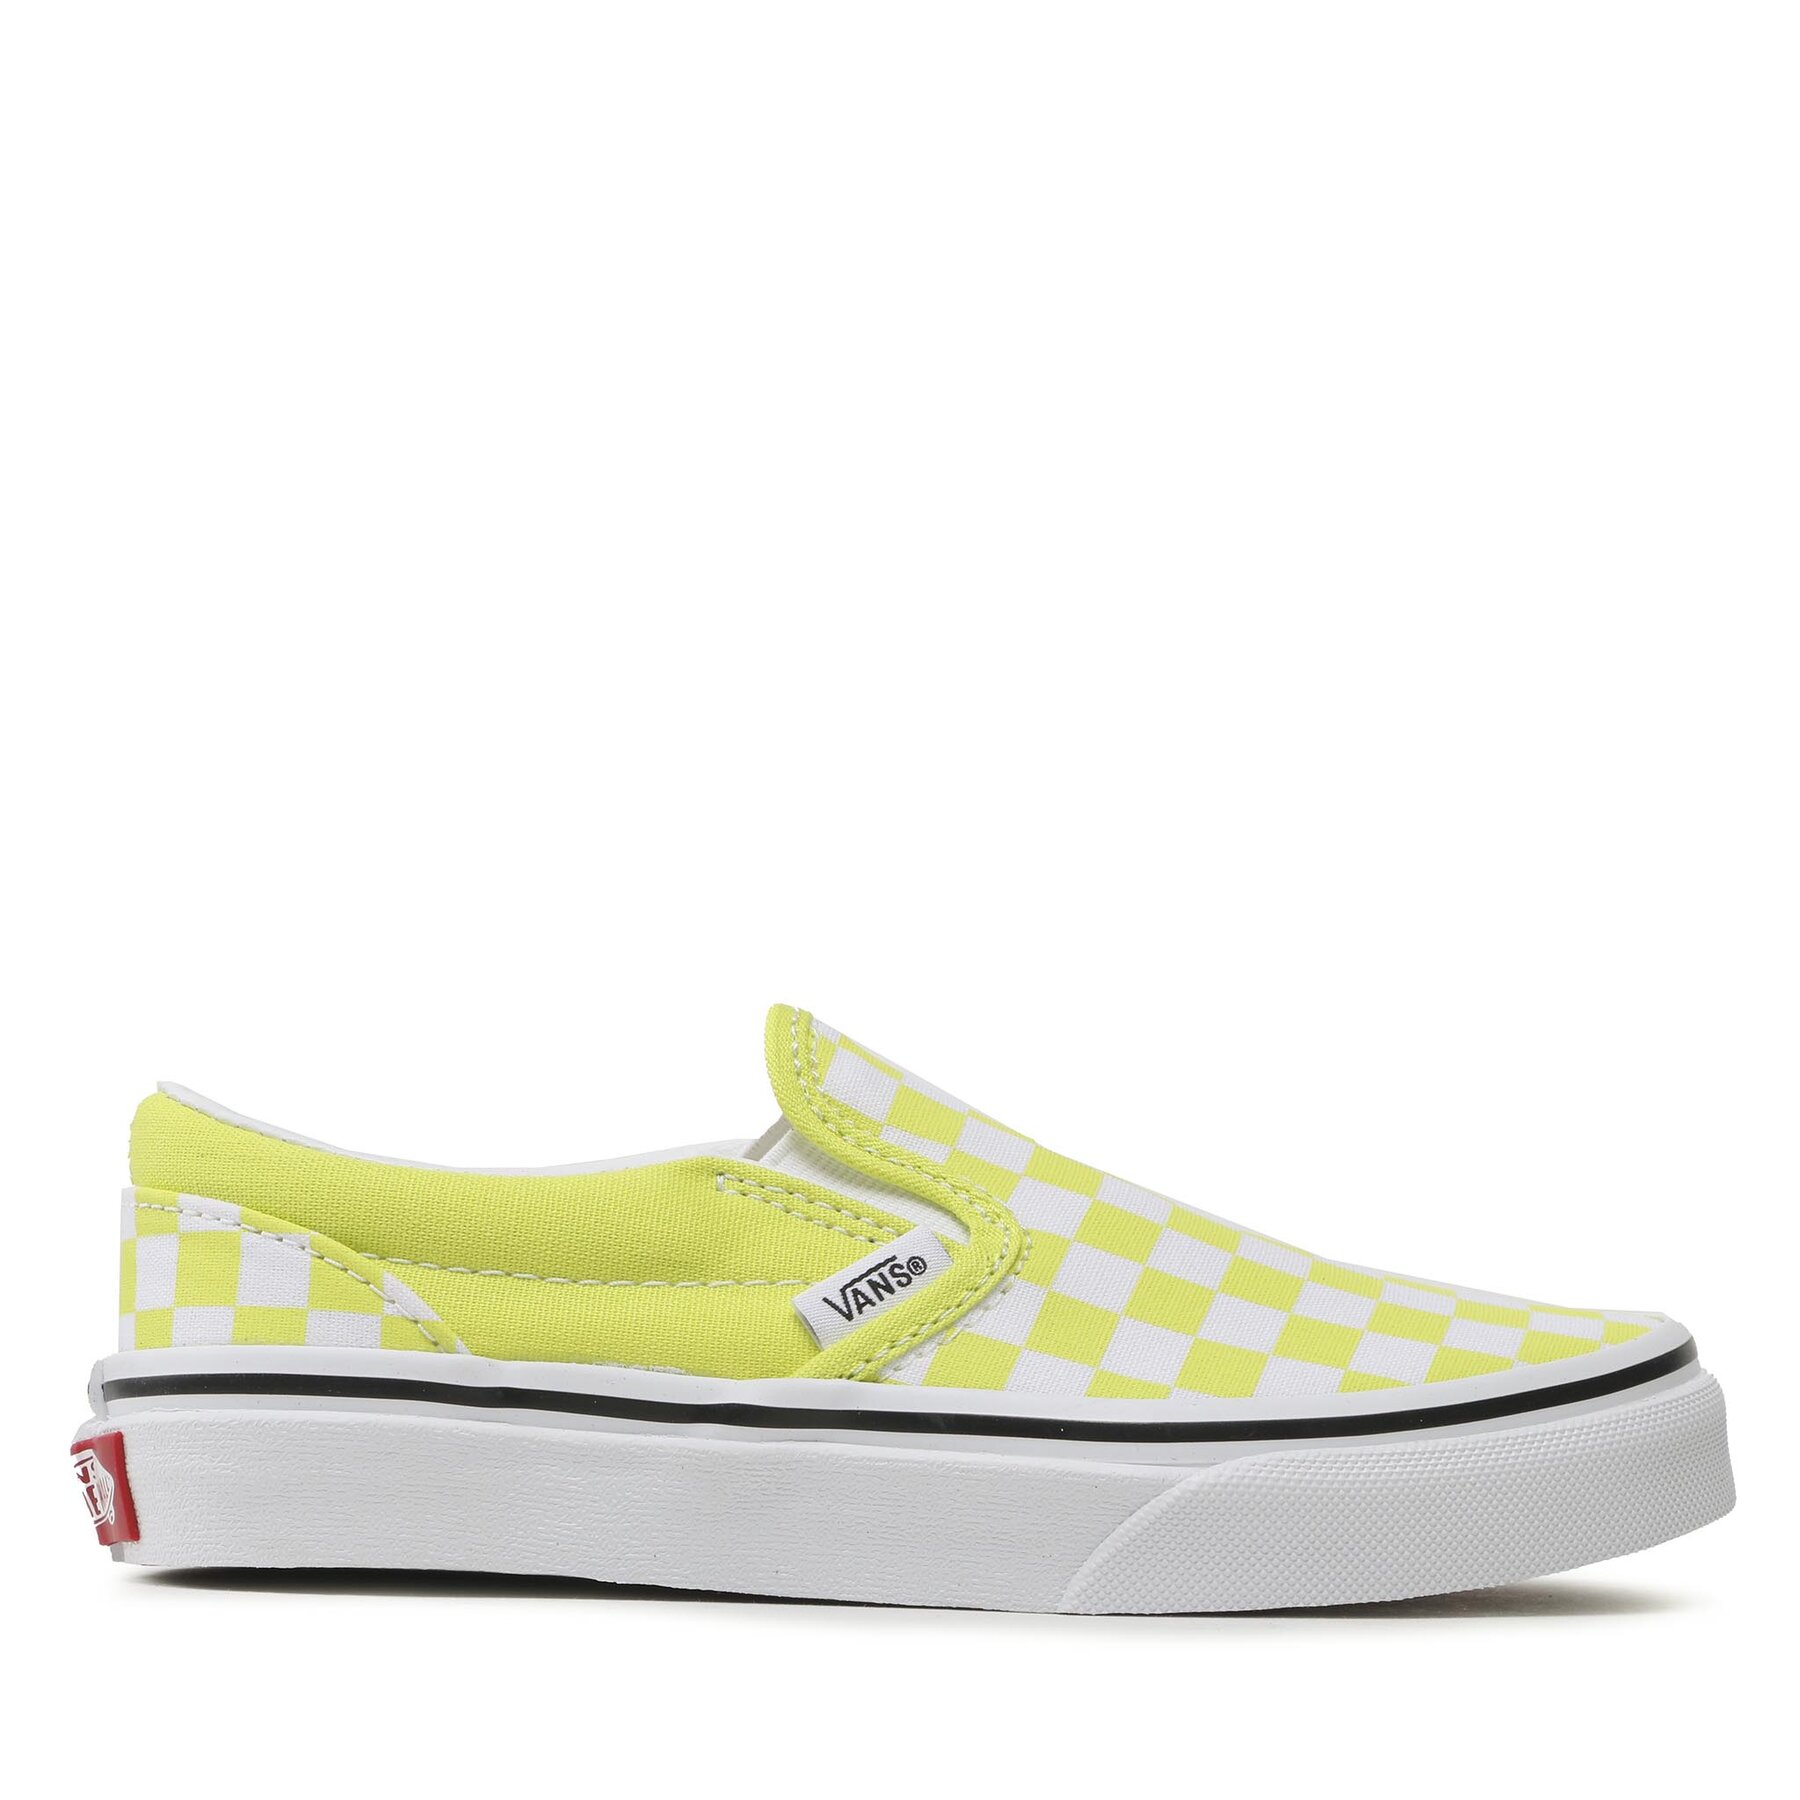 Sneakers aus Stoff Vans Classic Slip-On VN0A5KXMZUD1 Color Theory Checkerboard von Vans